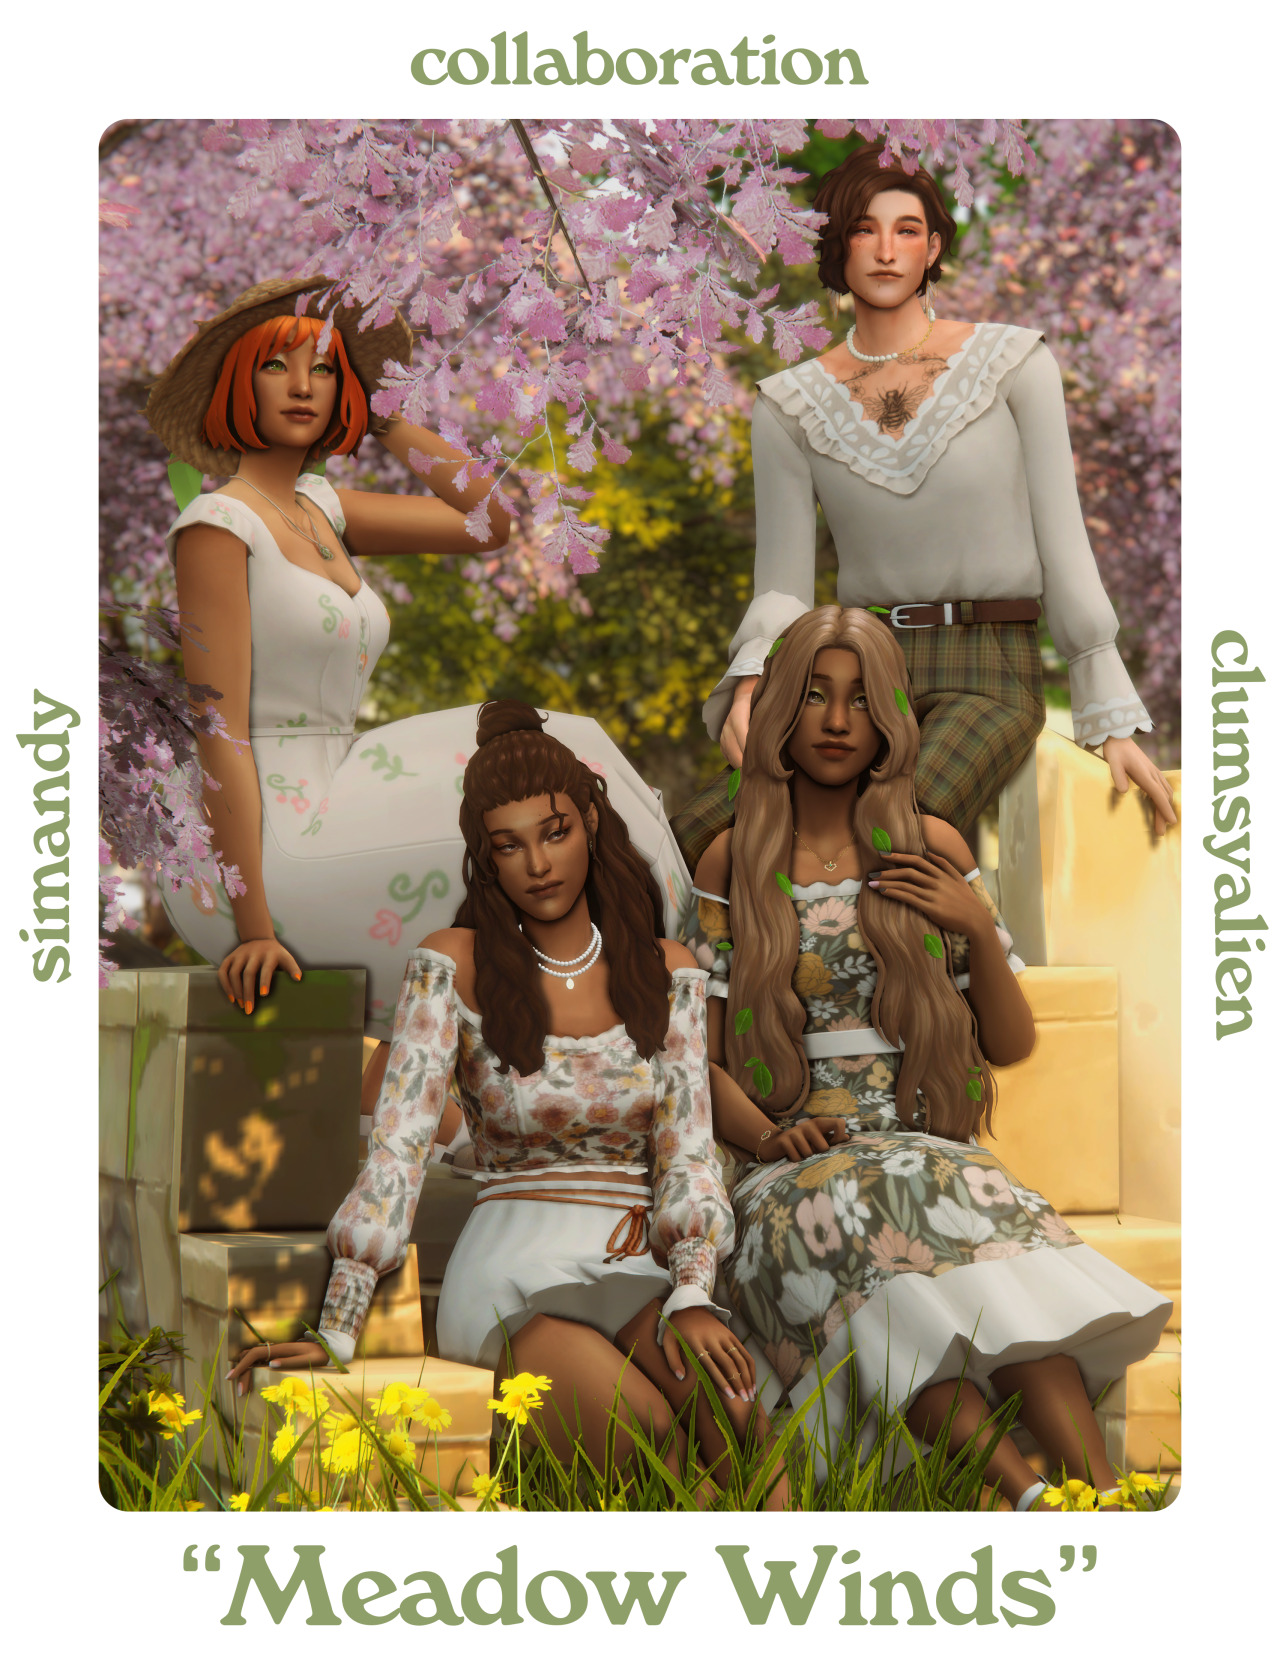 «Meadow Winds» by SIMANDY x CLUMSYALIEN🌷🌷🌷🌷🌷bgcall lodsshadow maps & normal mapsDOWNLOAD (patreon, free)
download Simandy’s side⭐HERE⭐ #ts4cc#s4cc#downloads#LETS GO